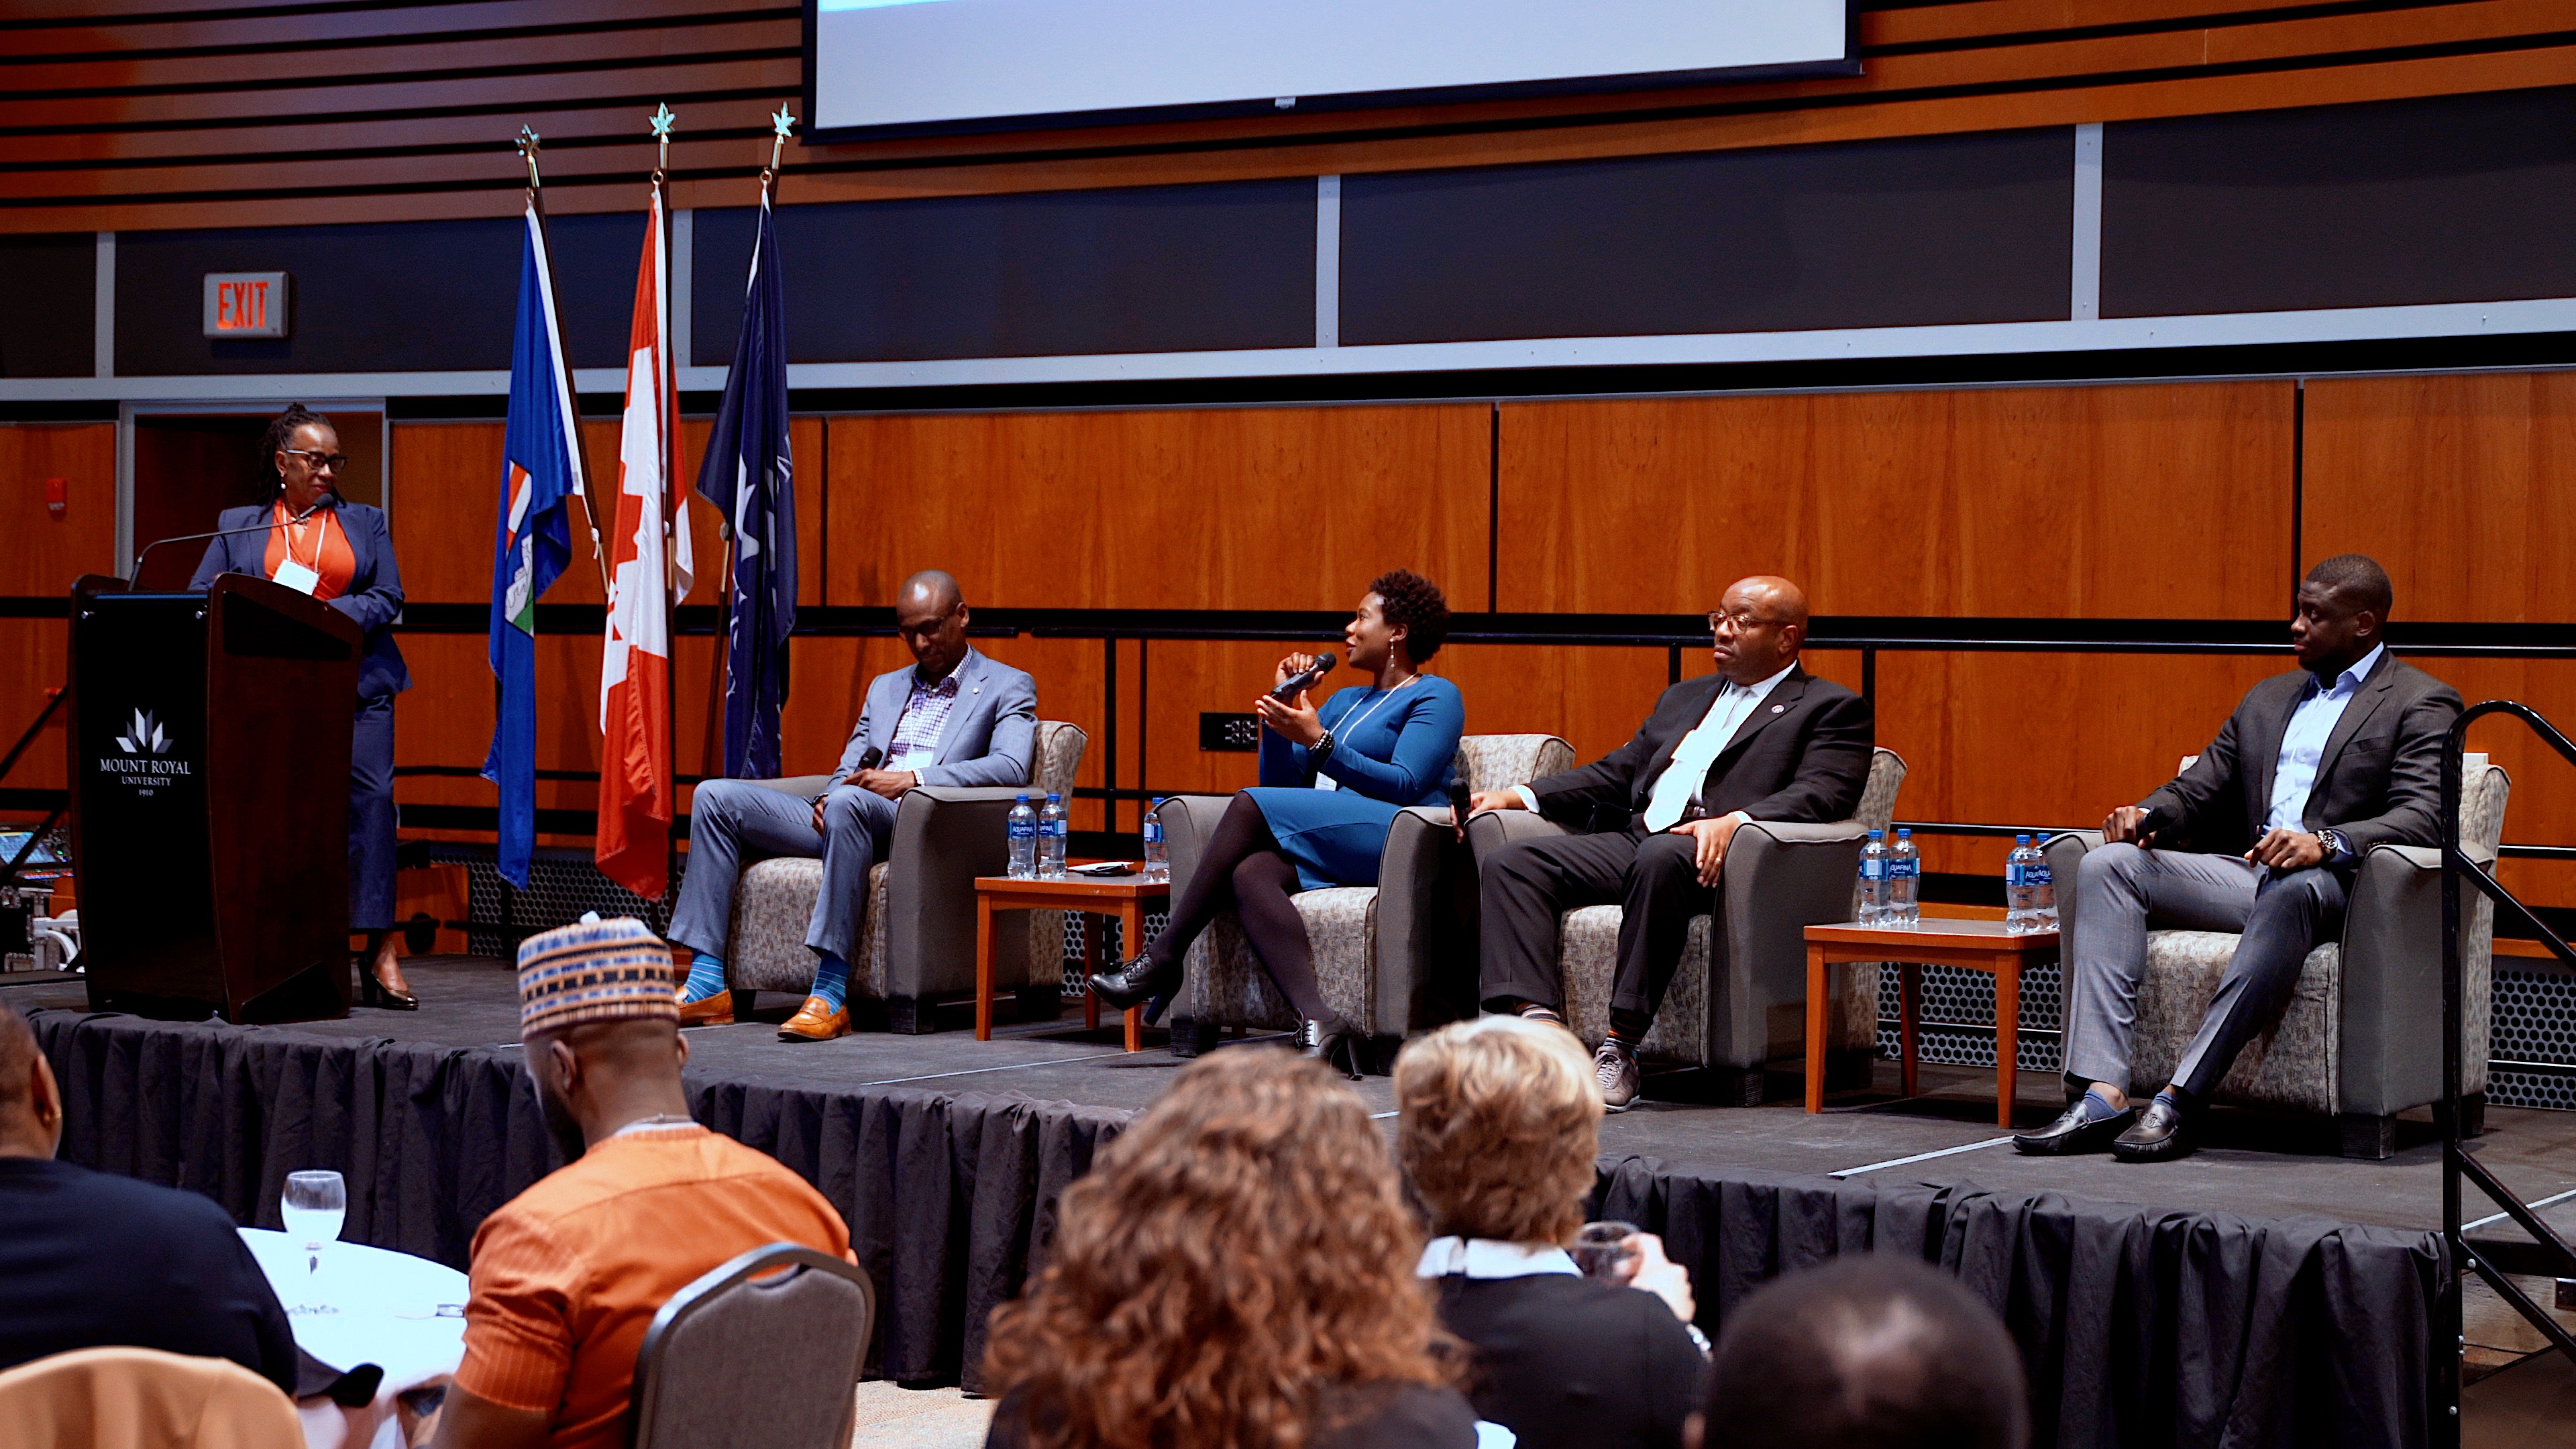 Assistant Professor Marva Ferguson, PhD, moderated the first panel with Kene Ilochonwu, bencher, Law Society of Alberta; Chi iliya-Ndule, corporate commercial lawyer, Blake, Cassels and Graydon LLP; Dennis Lee Banks, senior vice-president, operations services, Suncor; and Samuel Adeyemi, vice-president business, banking at BMO Financial Group.